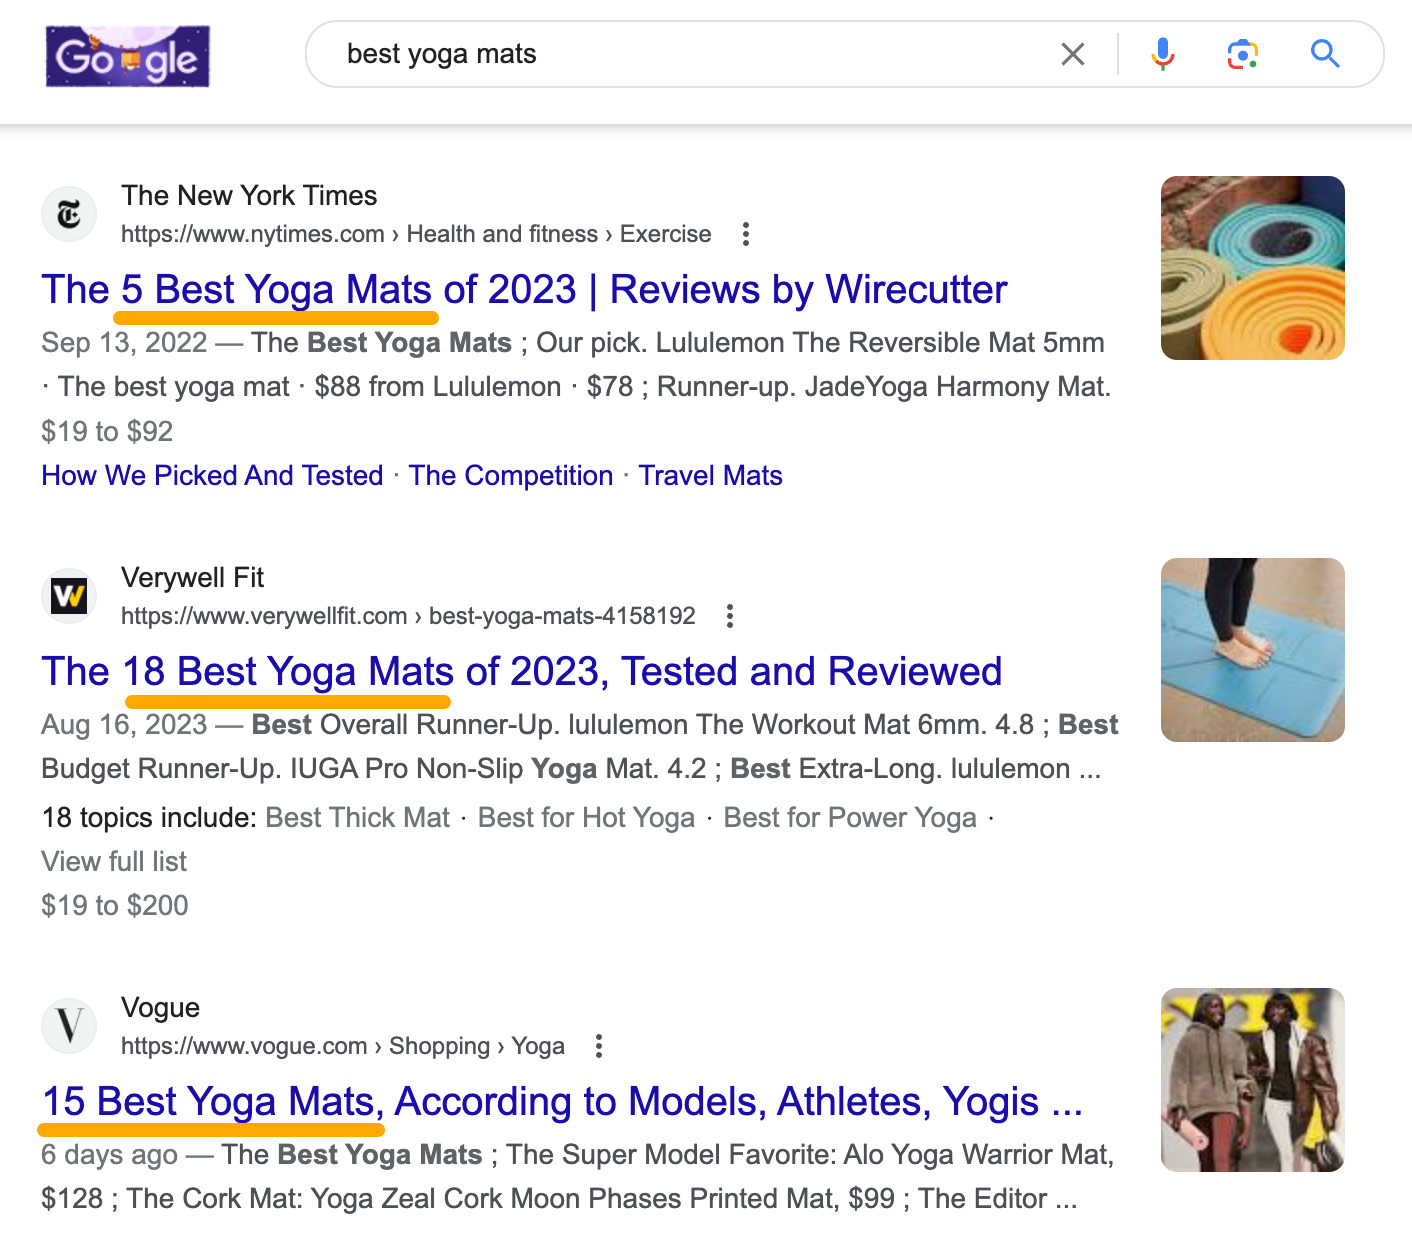 It's obviously what searchers want when they search for "best yoga mats"